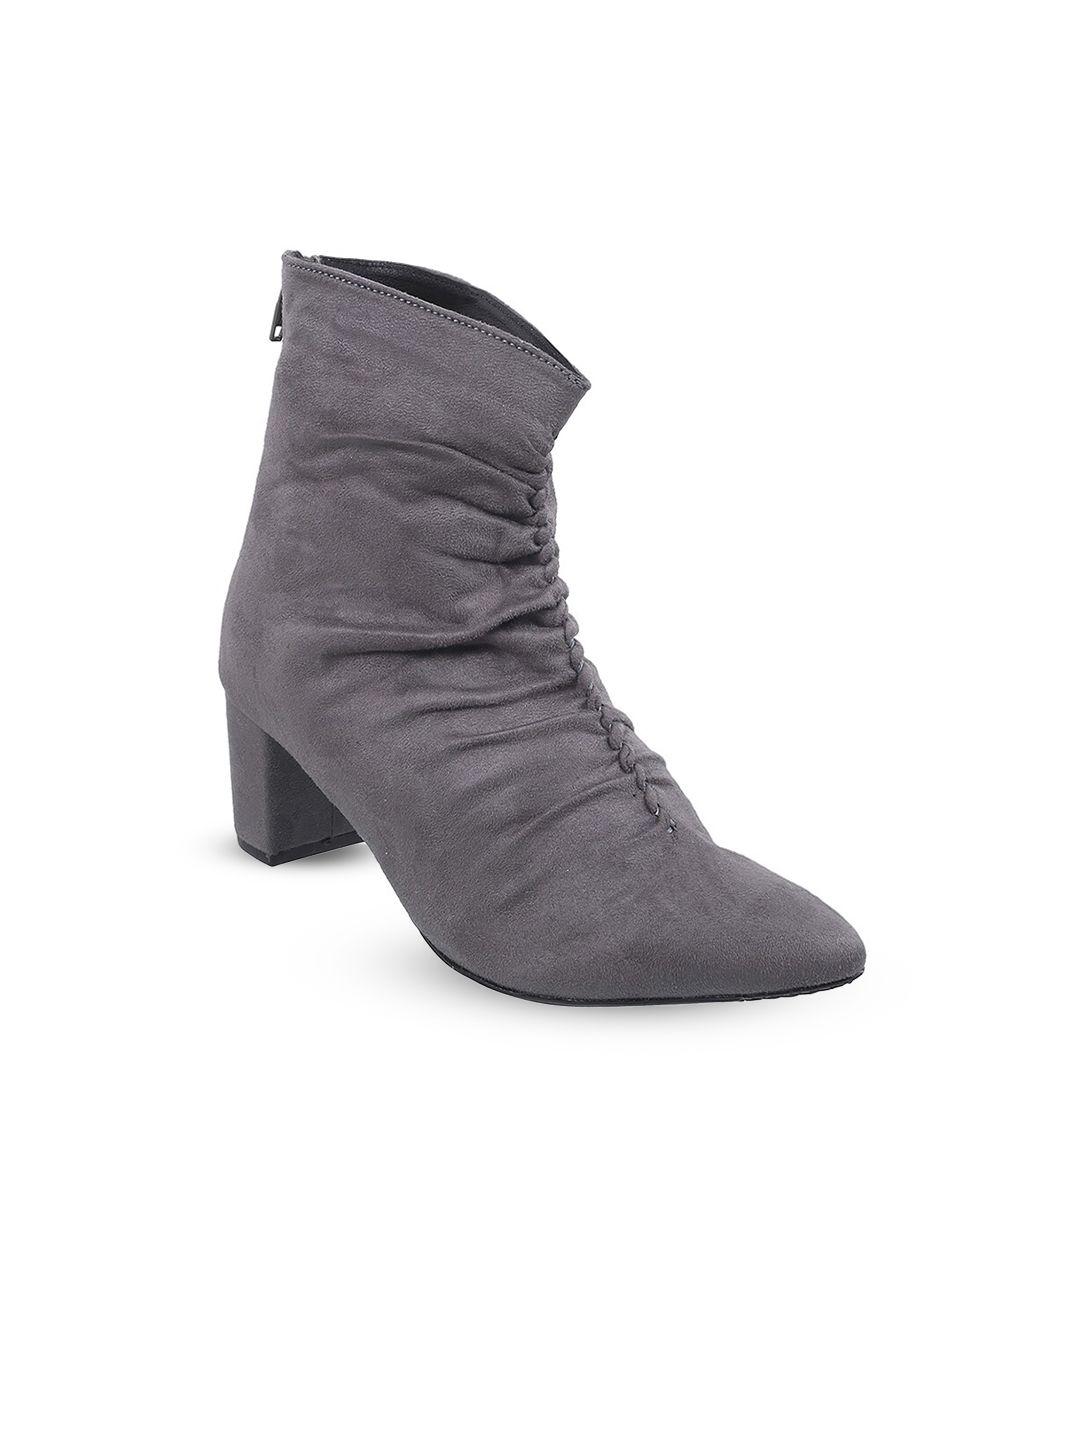 mochi-high-top-blocked-heel-pointed-toe-boots